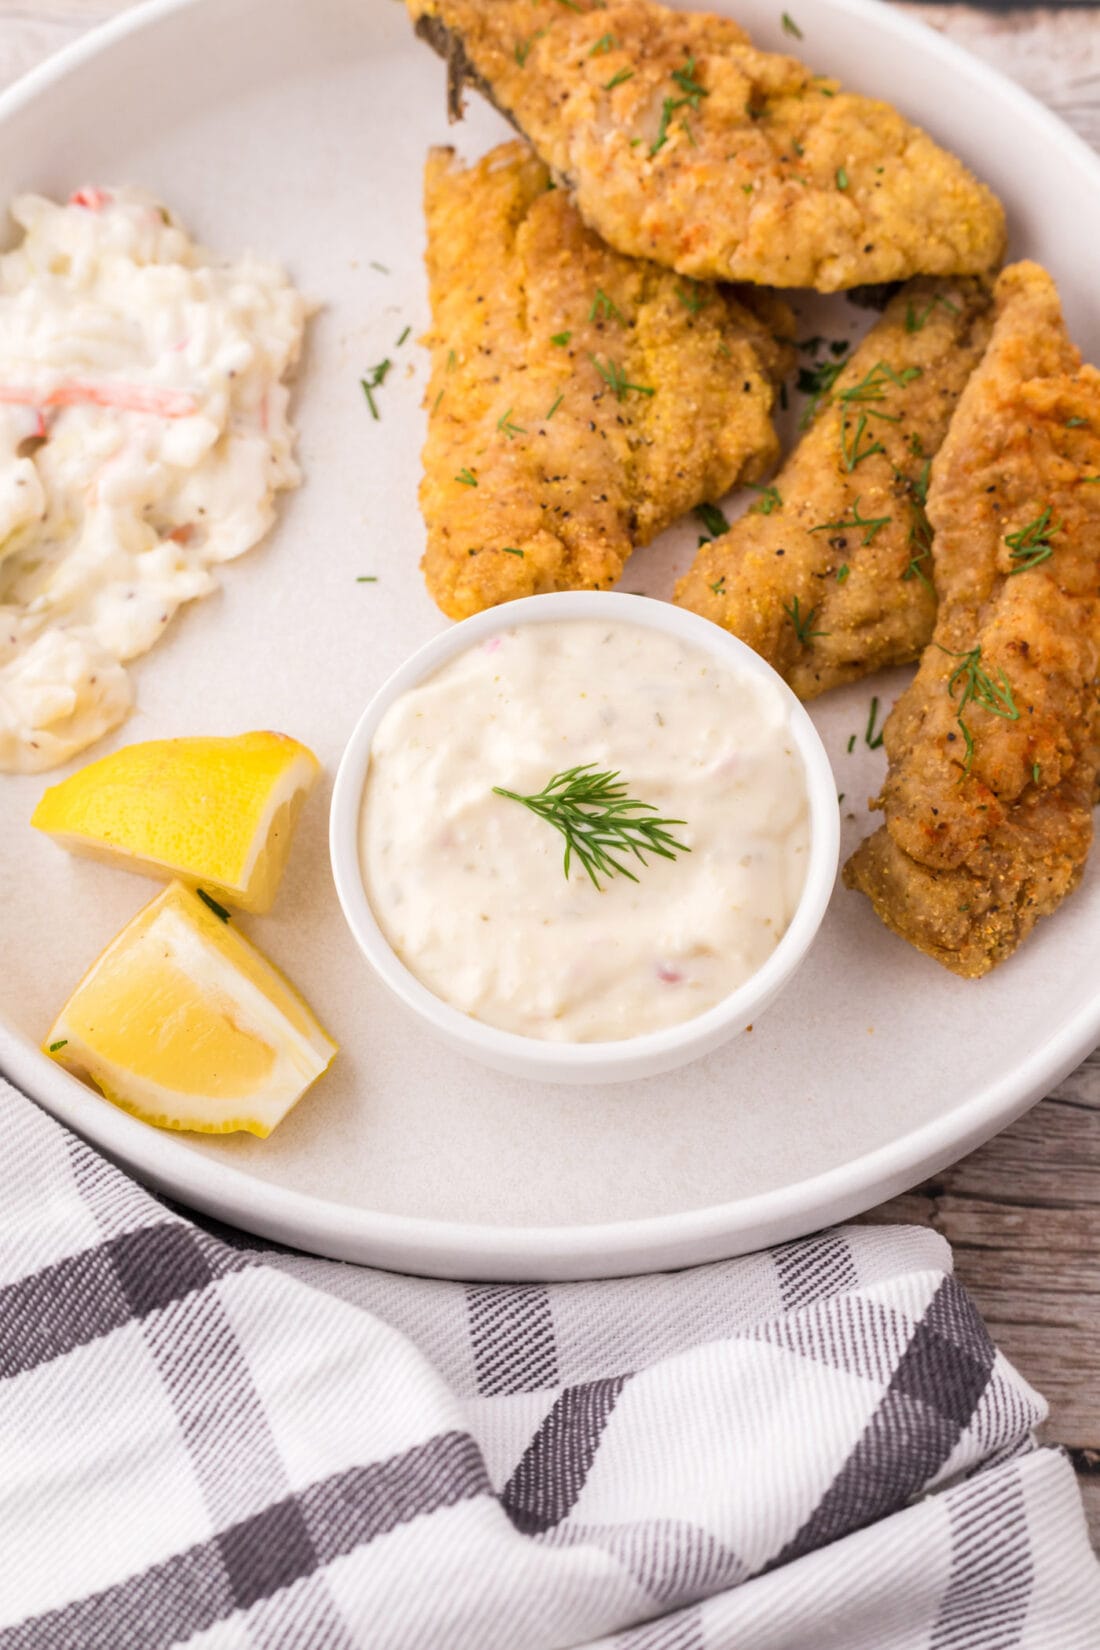 Small bowl of Tartar Sauce on a plate with breaded fish, coleslaw and lemons